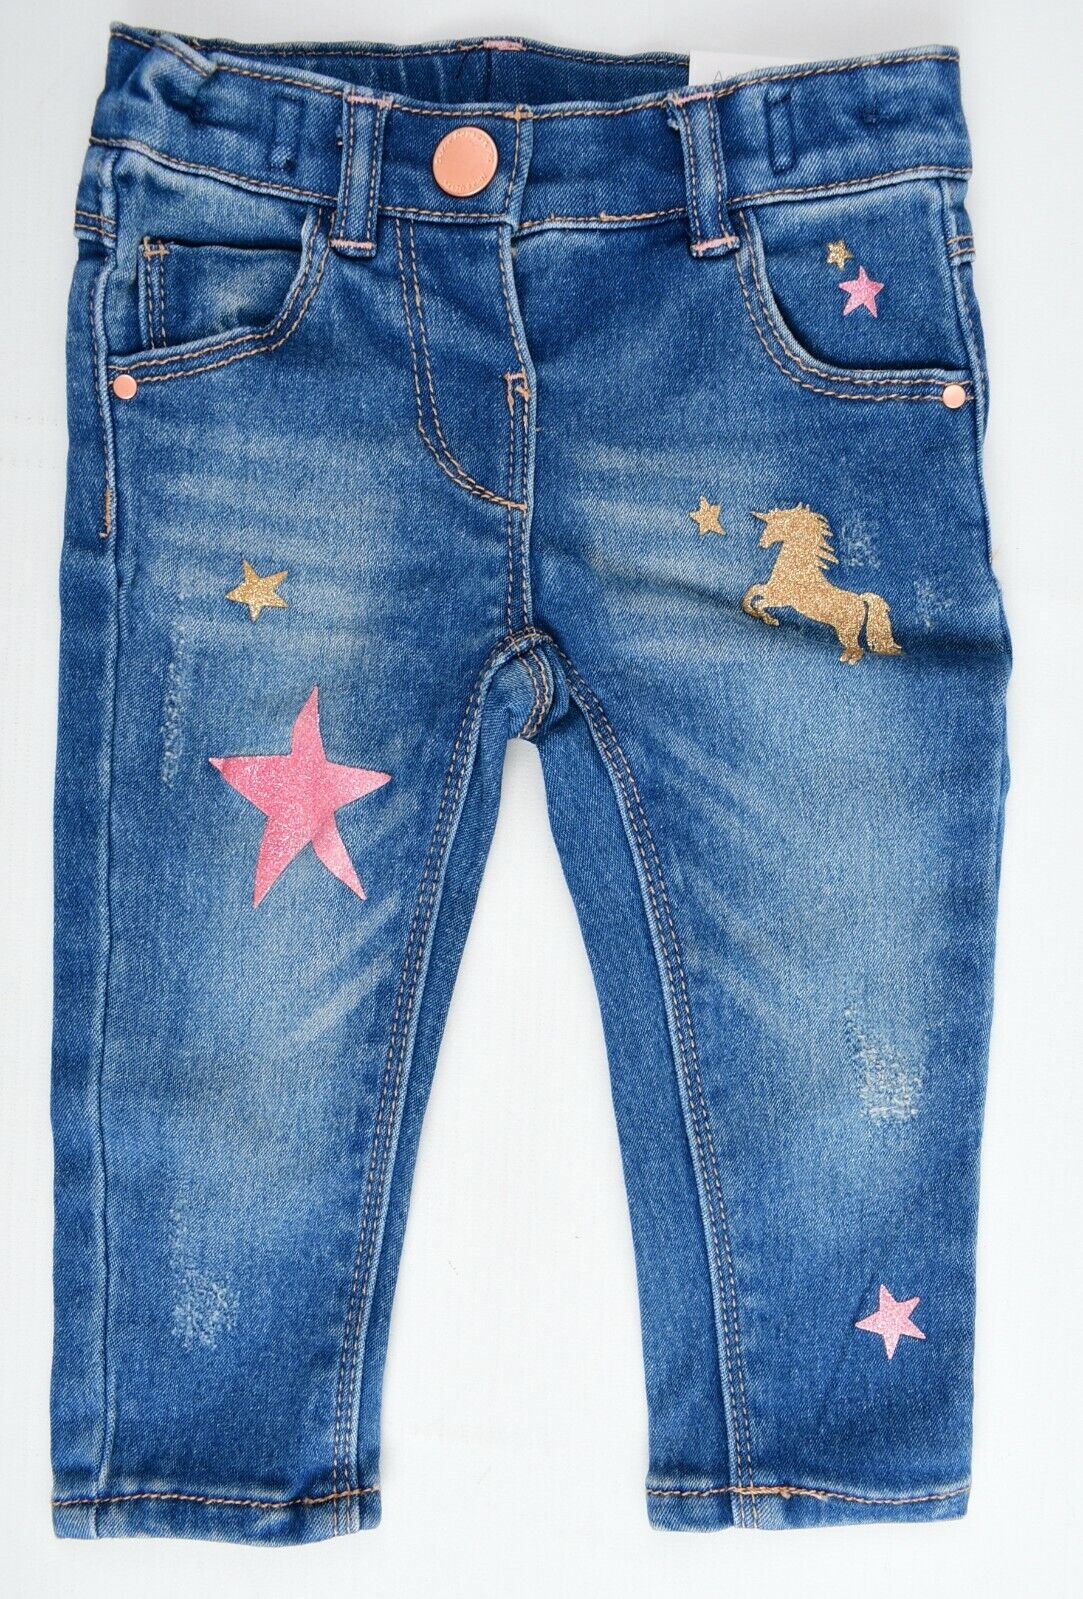 NEXT Bundle of 2x Baby Girls' Jeans, Floral/Star Print, size 6-9 months